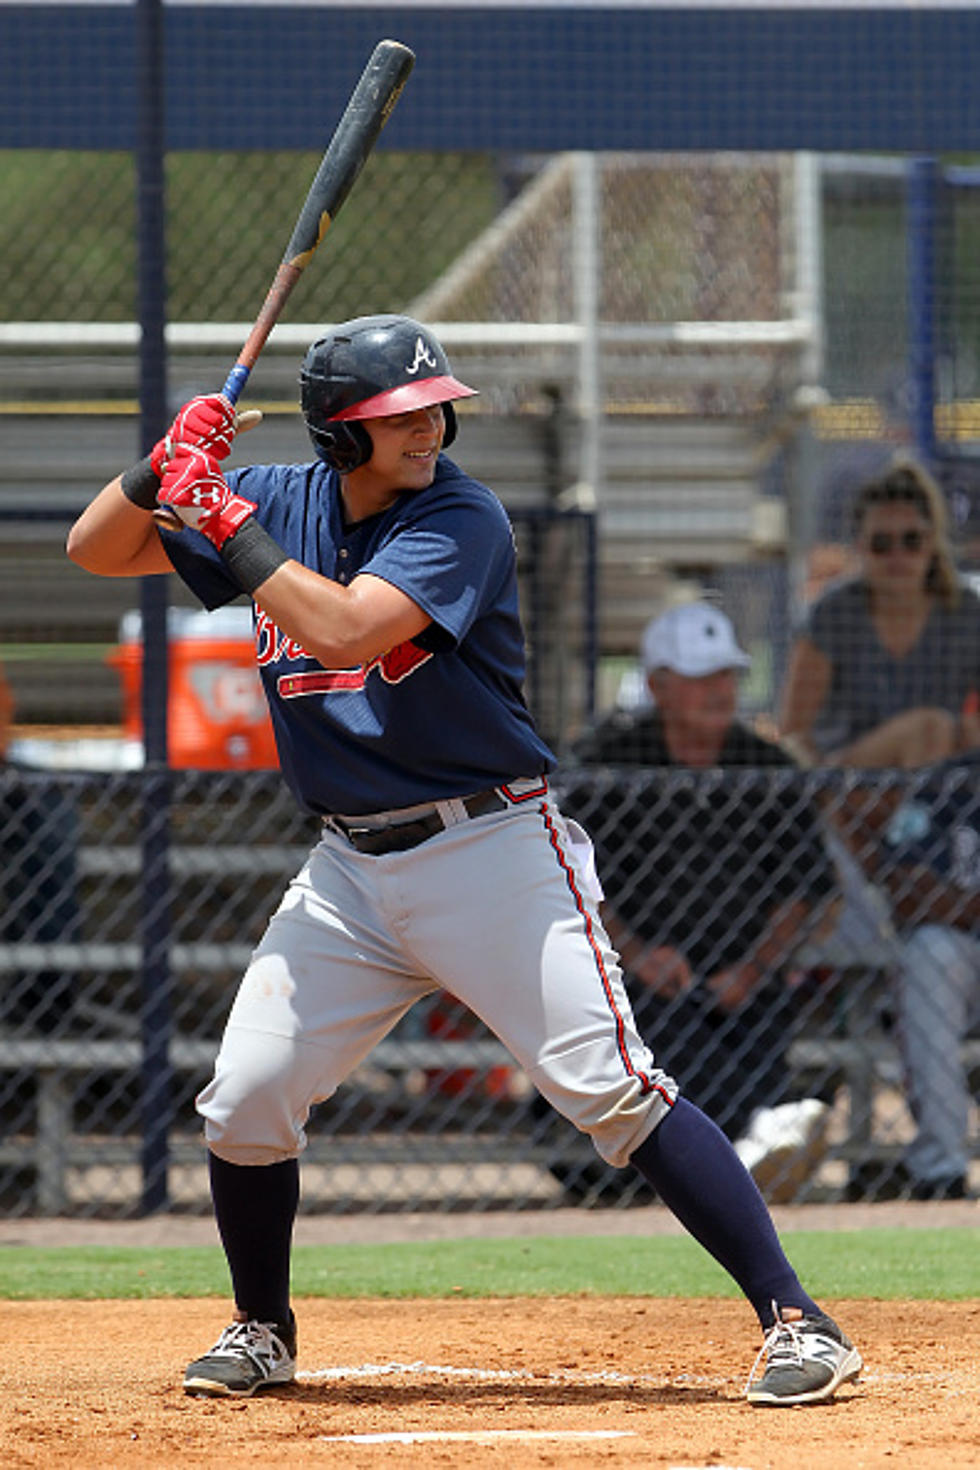 Phillies Sign Prospect Set Free in Sanctions Against Braves